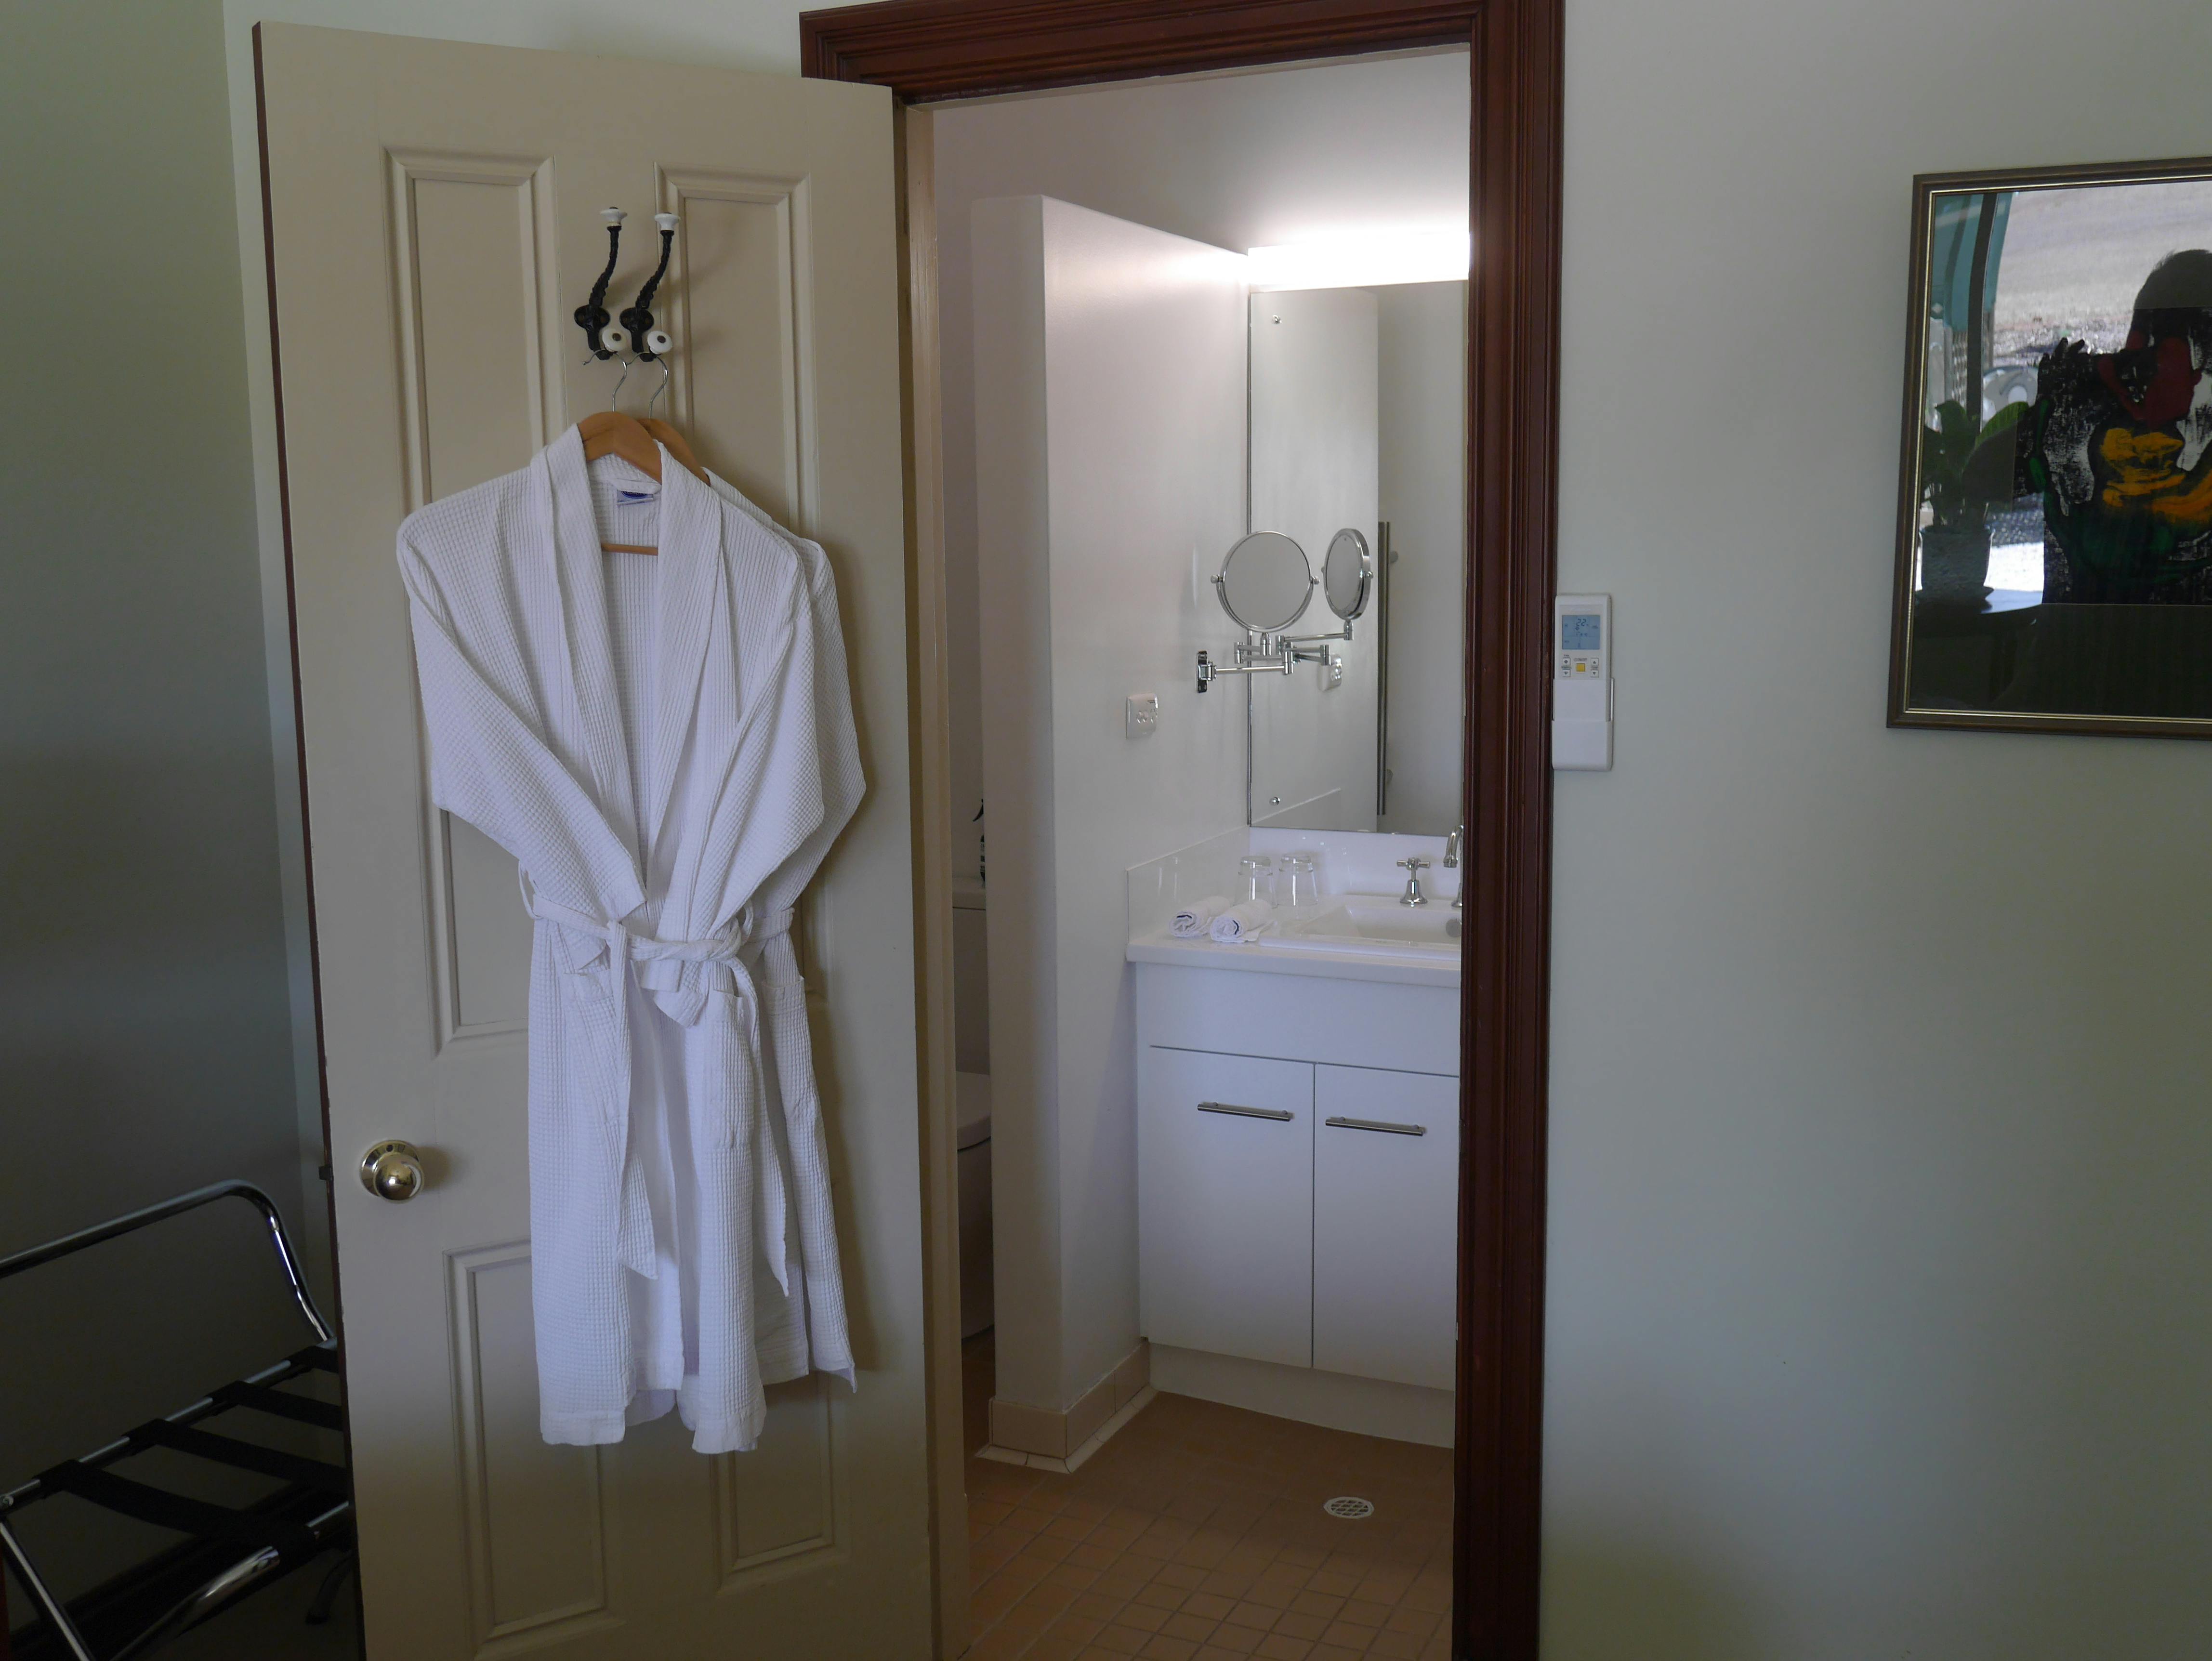 All guest rooms have private en suite facilities